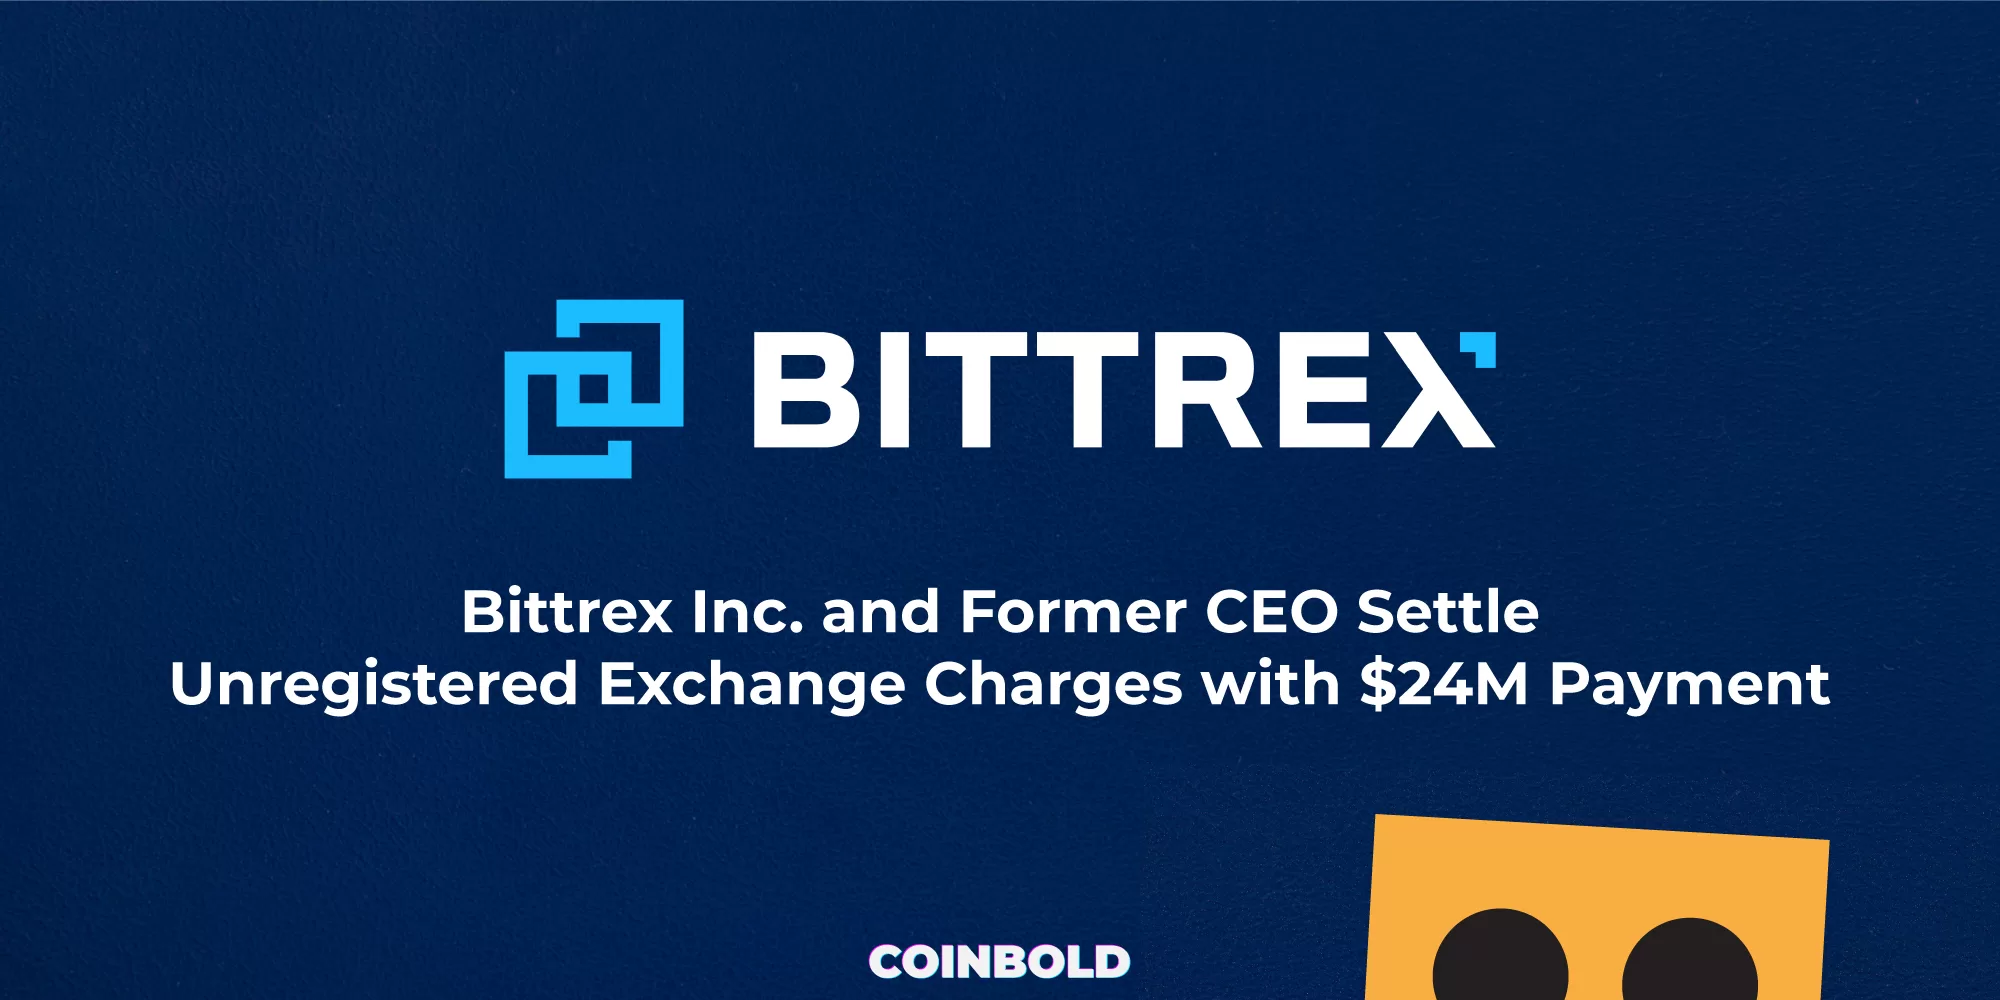 Bittrex Inc. and Former CEO Settle Unregistered Exchange Charges with $24M Payment